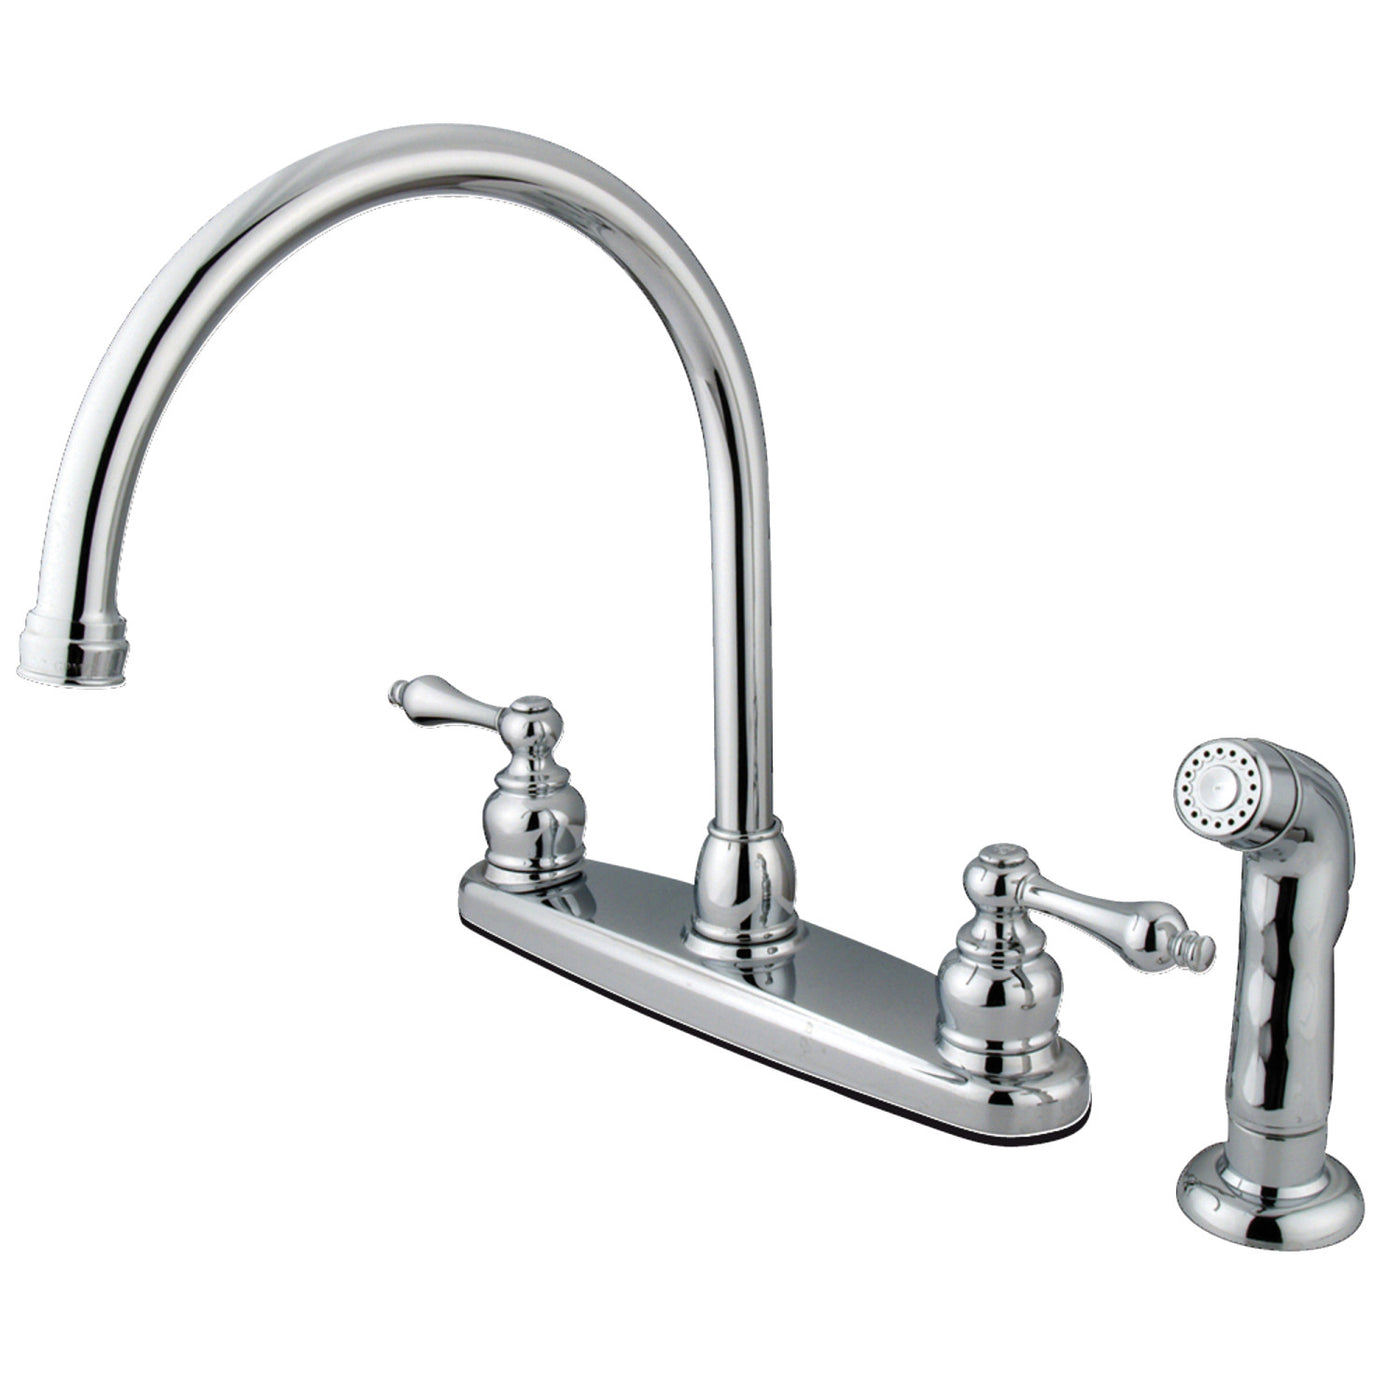 Elements of Design EB721ALSP 8-Inch Centerset Kitchen Faucet with Sprayer, Polished Chrome